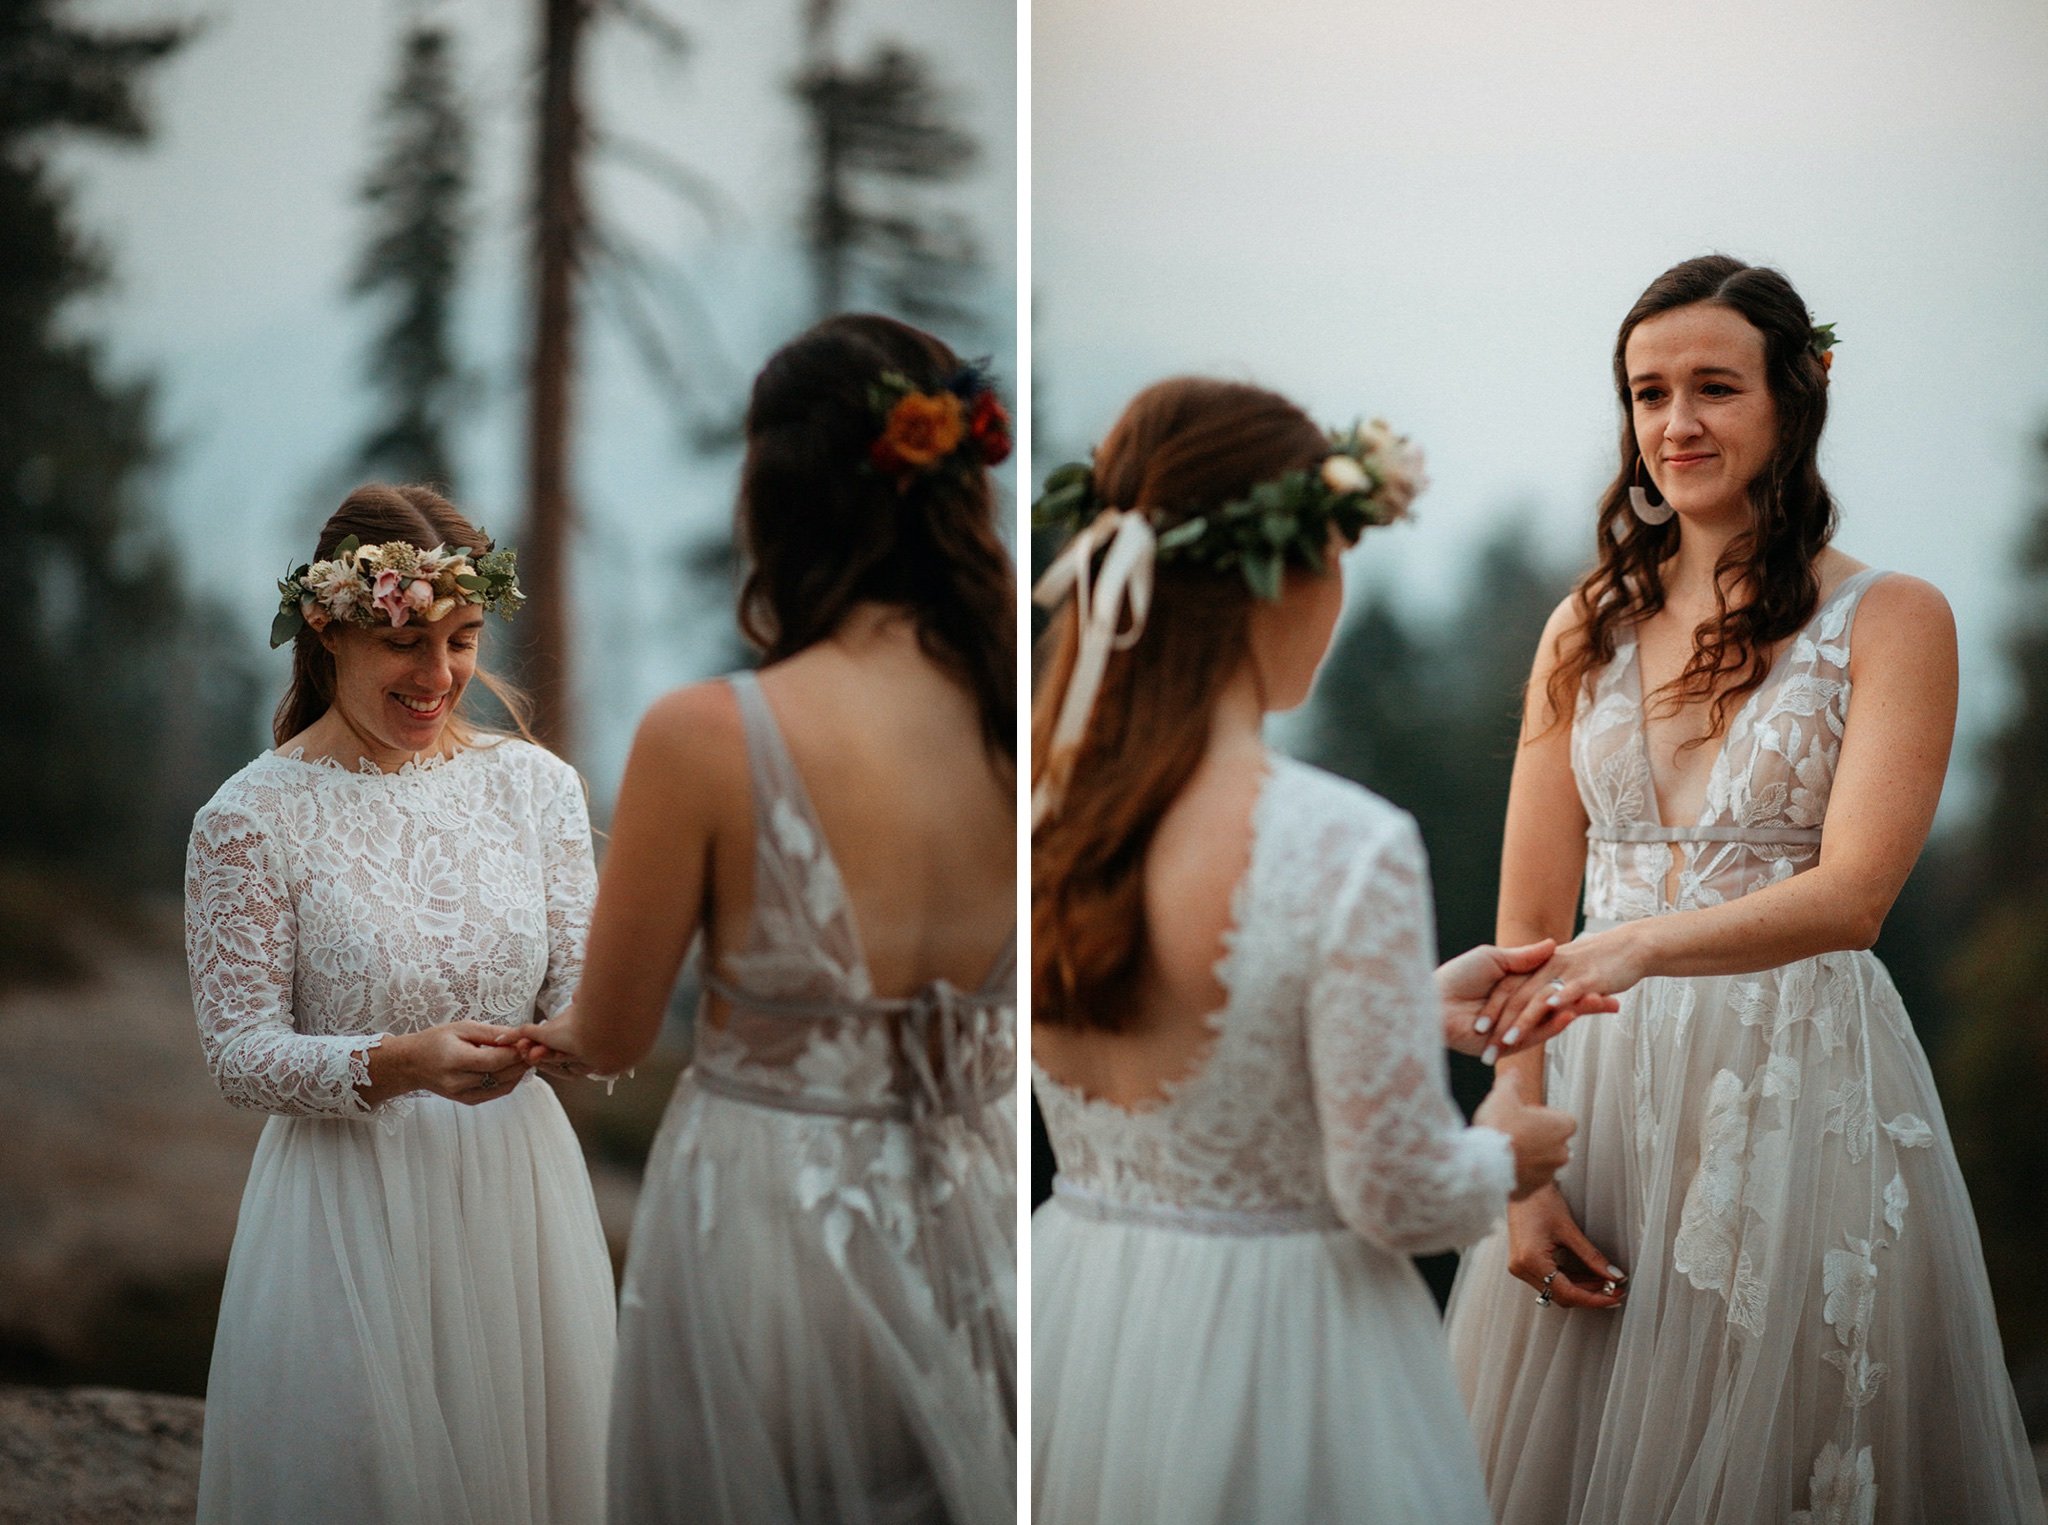 Yosemite National Park Elopement with Two Brides-Will Khoury66.jpg